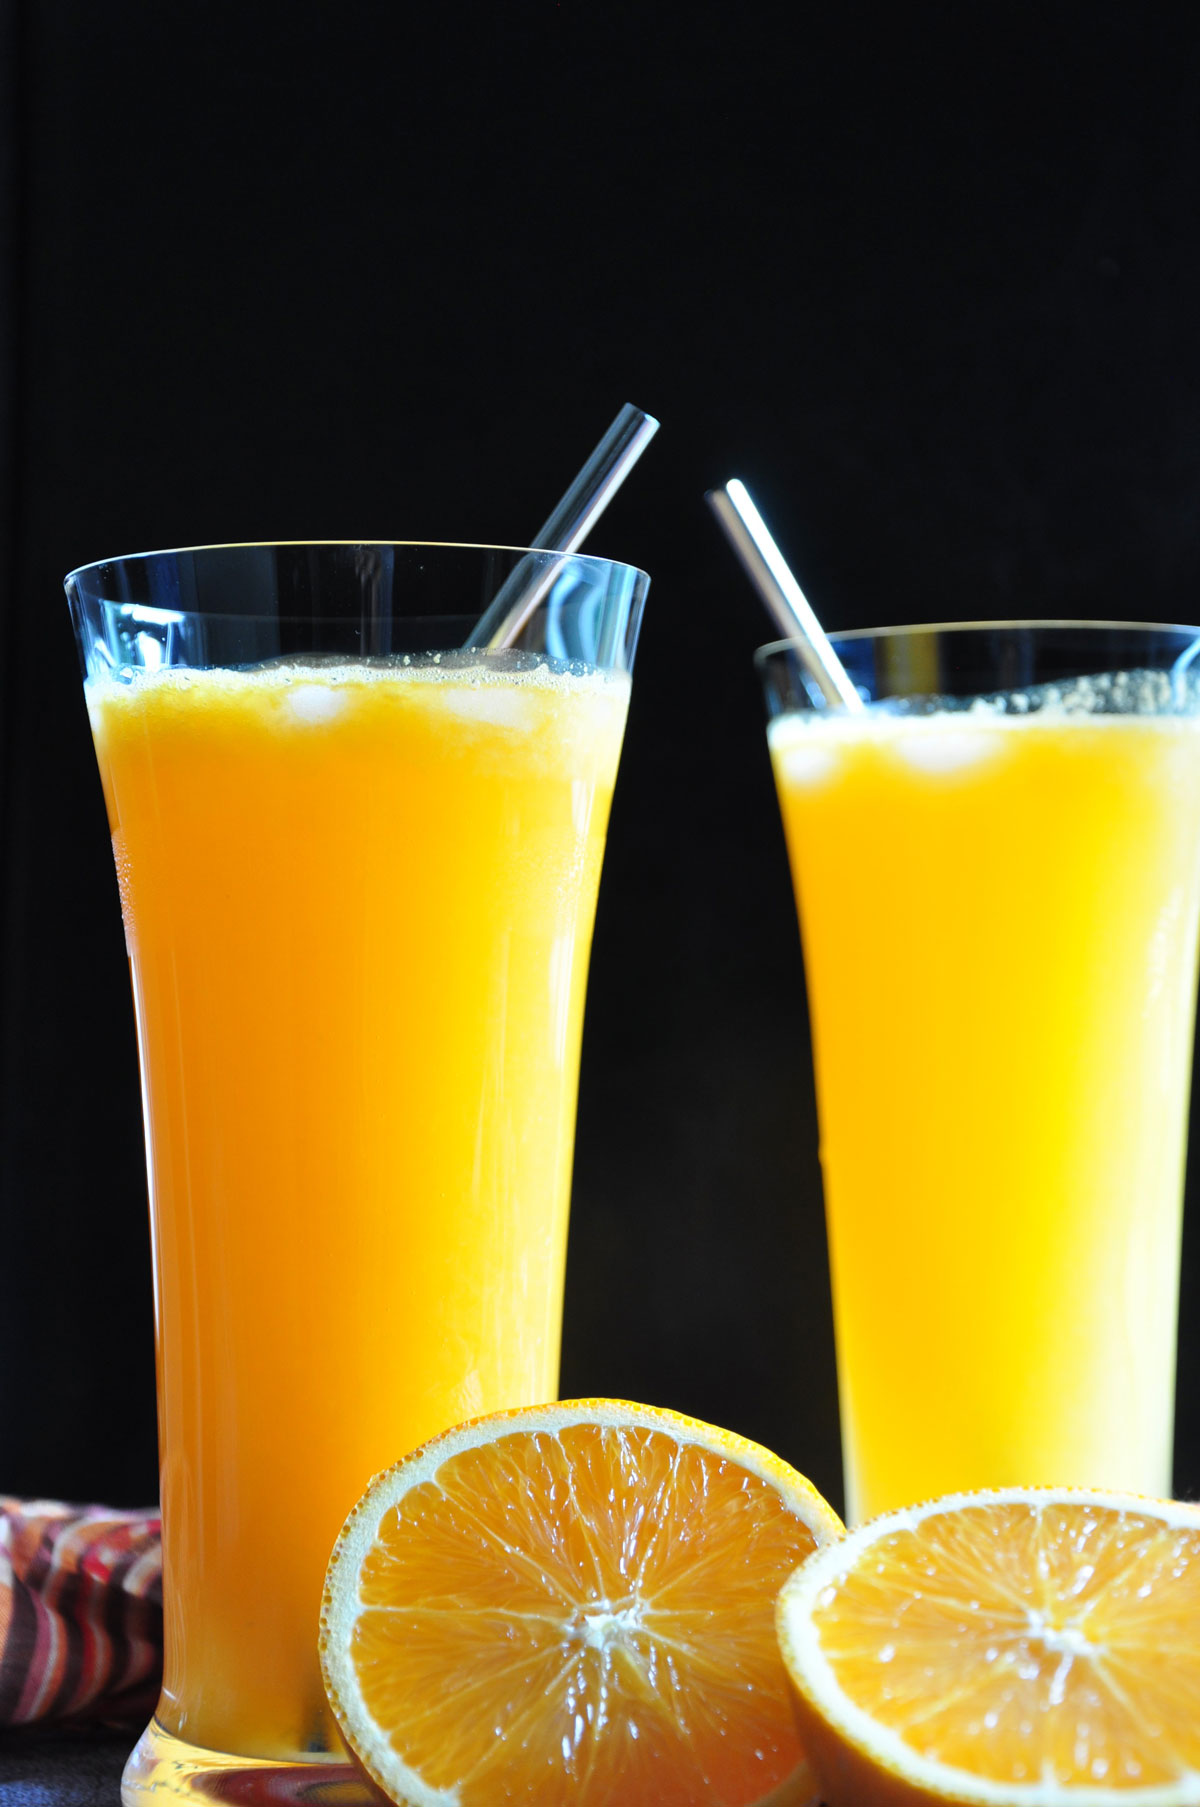 Orange Soda in two tall glass with a black background.